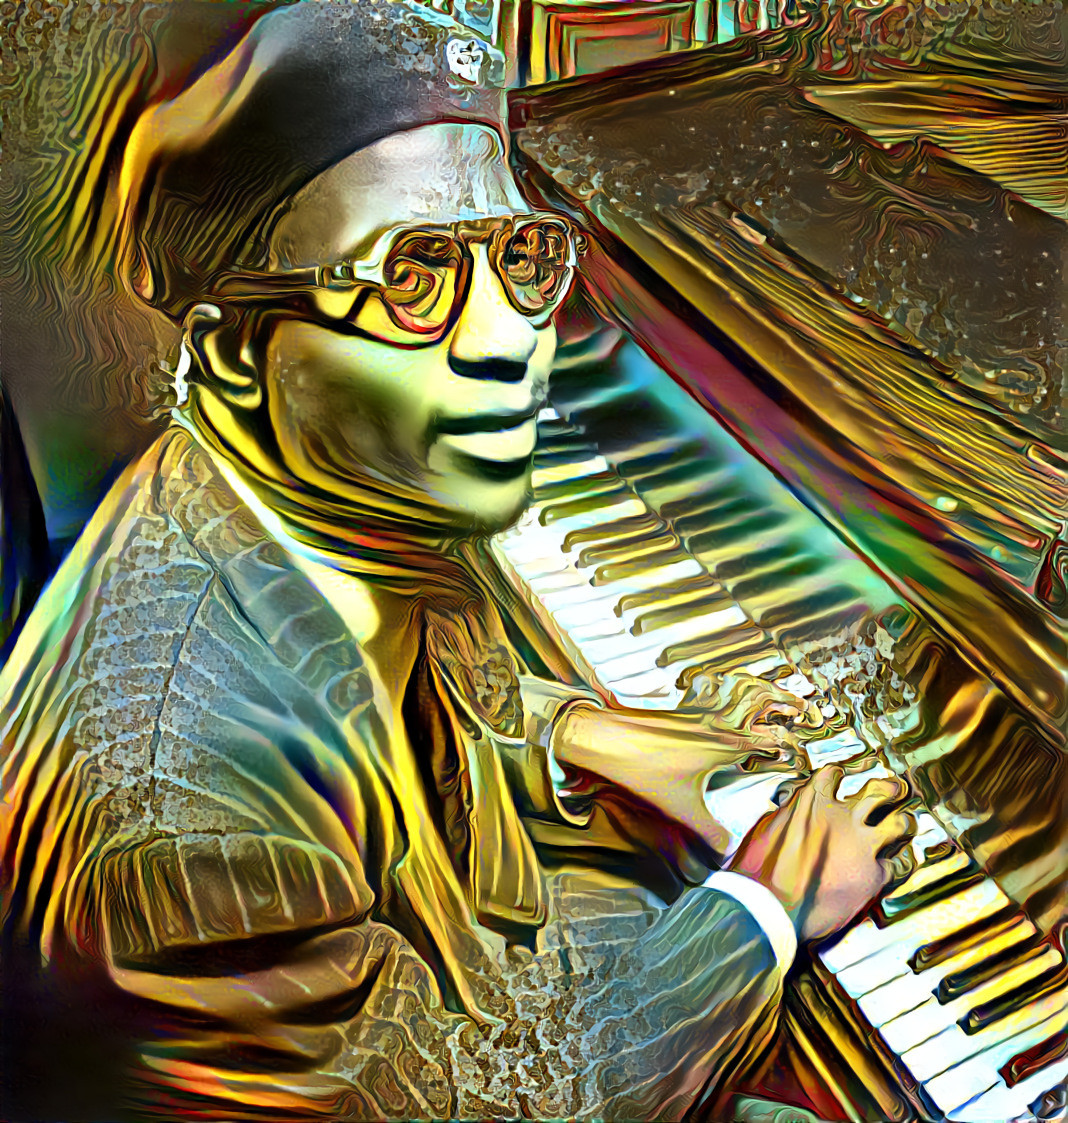 Thelonious Sphere Monk, (October 10, 1917 – February 17, 1982), American jazz pianist and composer. Monk at Minton's Playhouse, New York, 1947. (Style : Peter Art Barlow - Frax Colour style challenge).